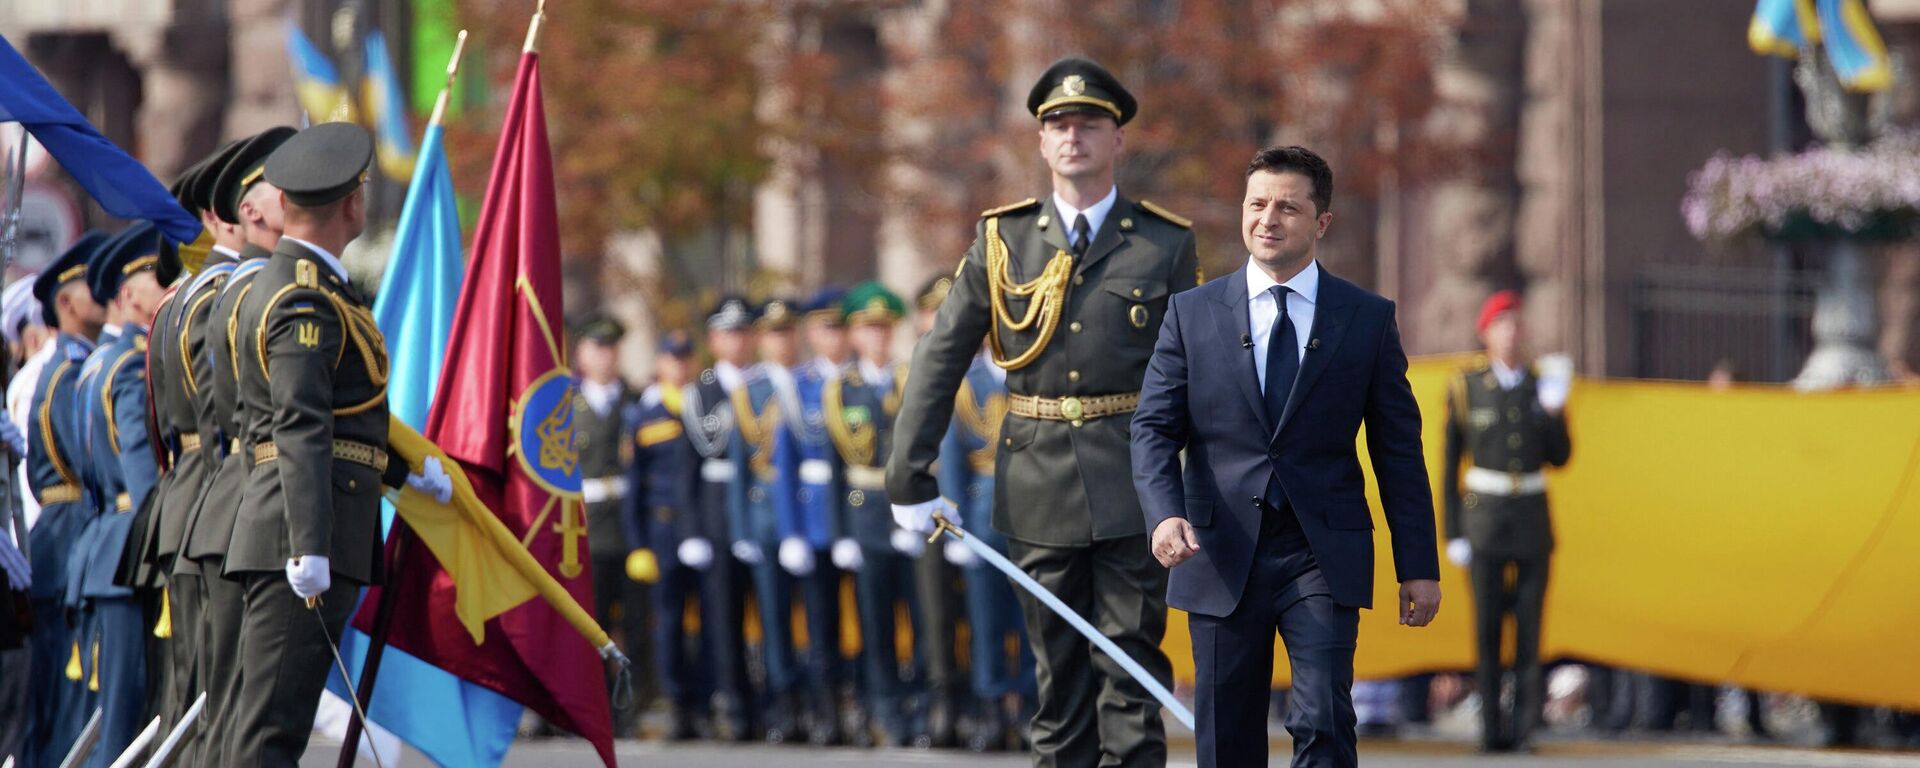 This handout picture released by the Ukrainian Presidential Press Service on August 24, 2021, shows Ukrainian President Volodymyr Zelensky walking to attend the Independence Day military parade in Kiev - Sputnik International, 1920, 03.06.2022